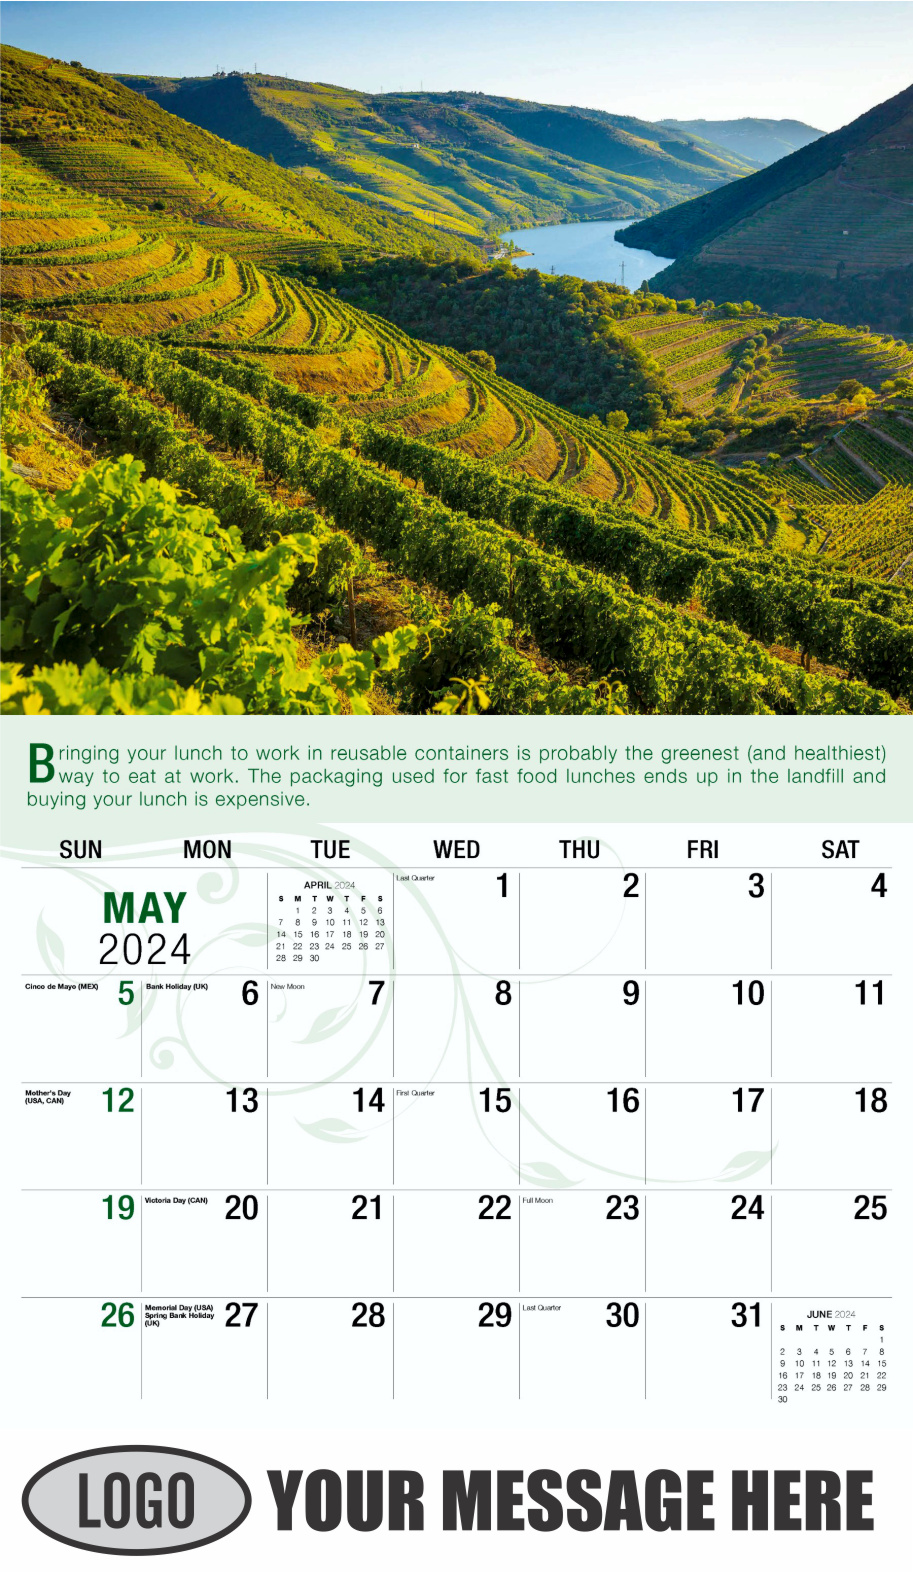 Go Green 2024 Business Promotion Calendar - May